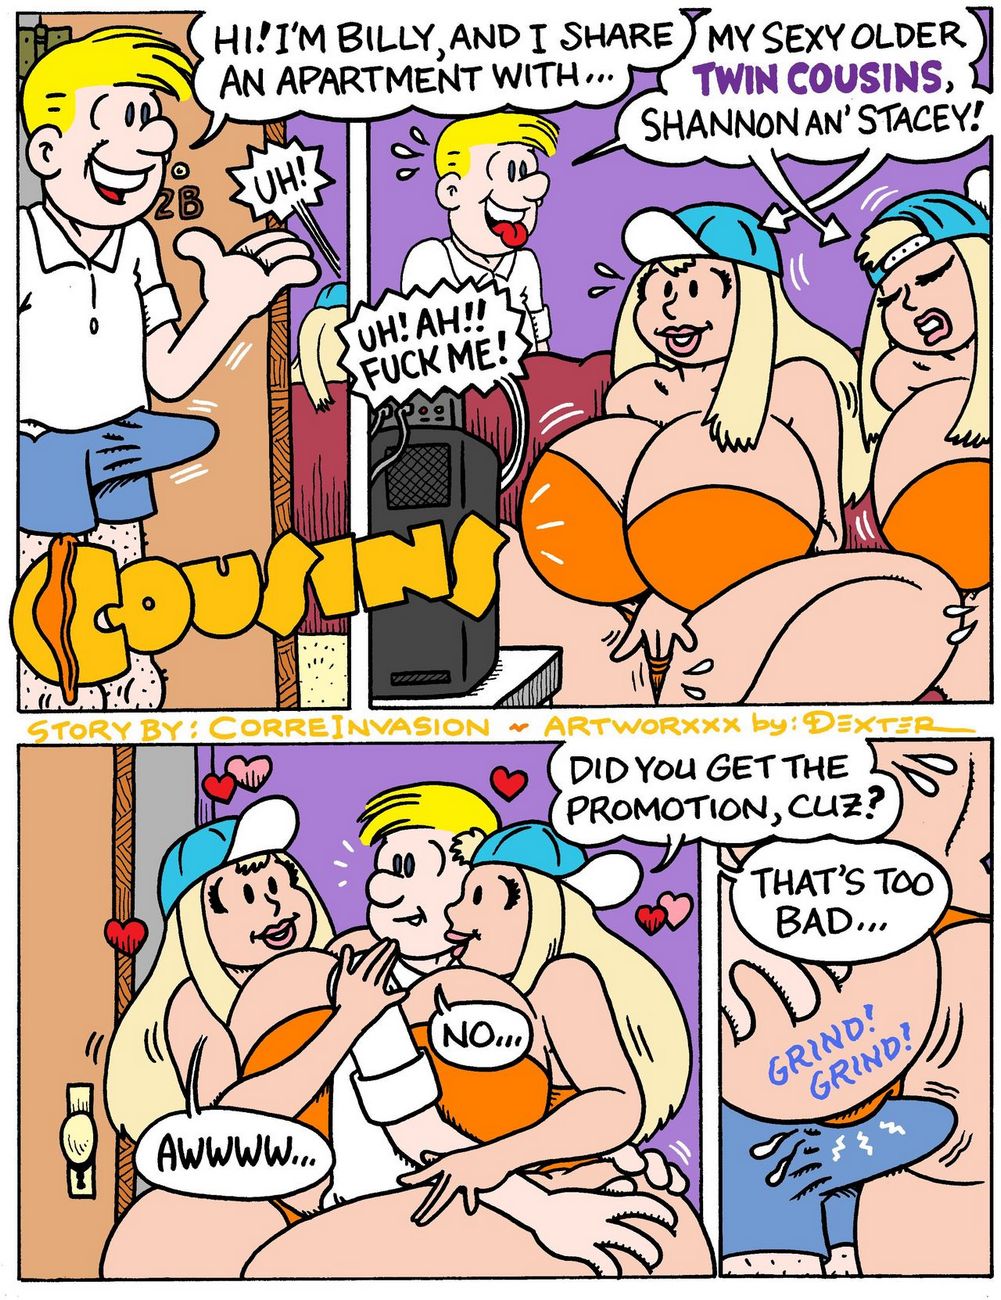 Cousins - MyHentaiGallery Free Porn Comics and Sex Cartoons